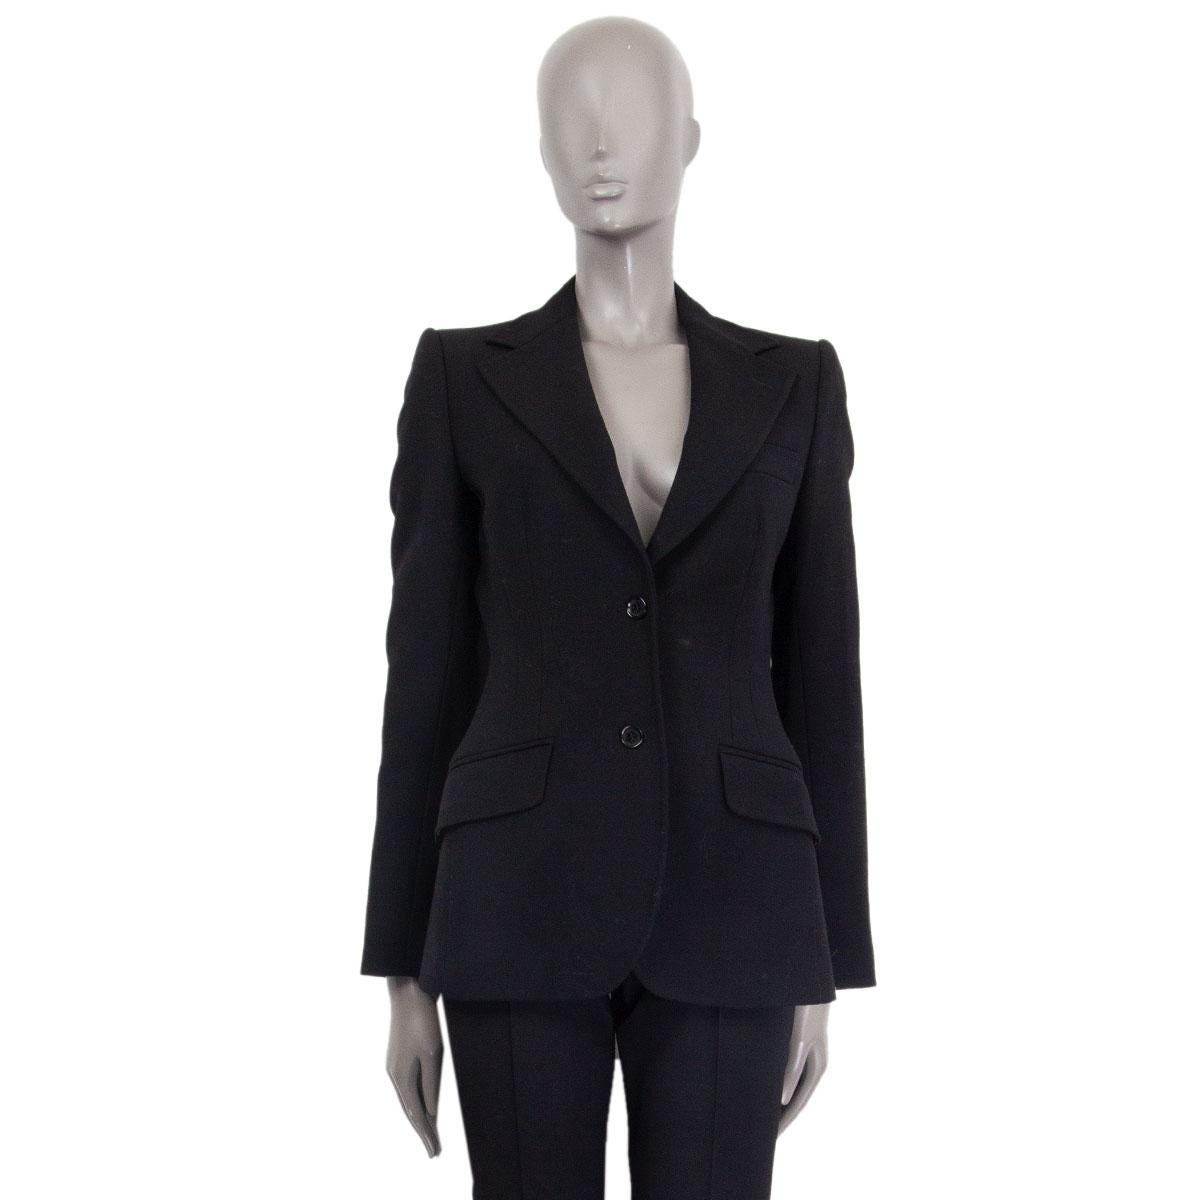 Dolce & Gabbana classic single breasted blazer in black virgin wool (100%) with a notch collar, one chest pocket and two front decorative flap pockets. Closes on the front with buttons. Lined in brown and black leopard print viscose. Has been worn